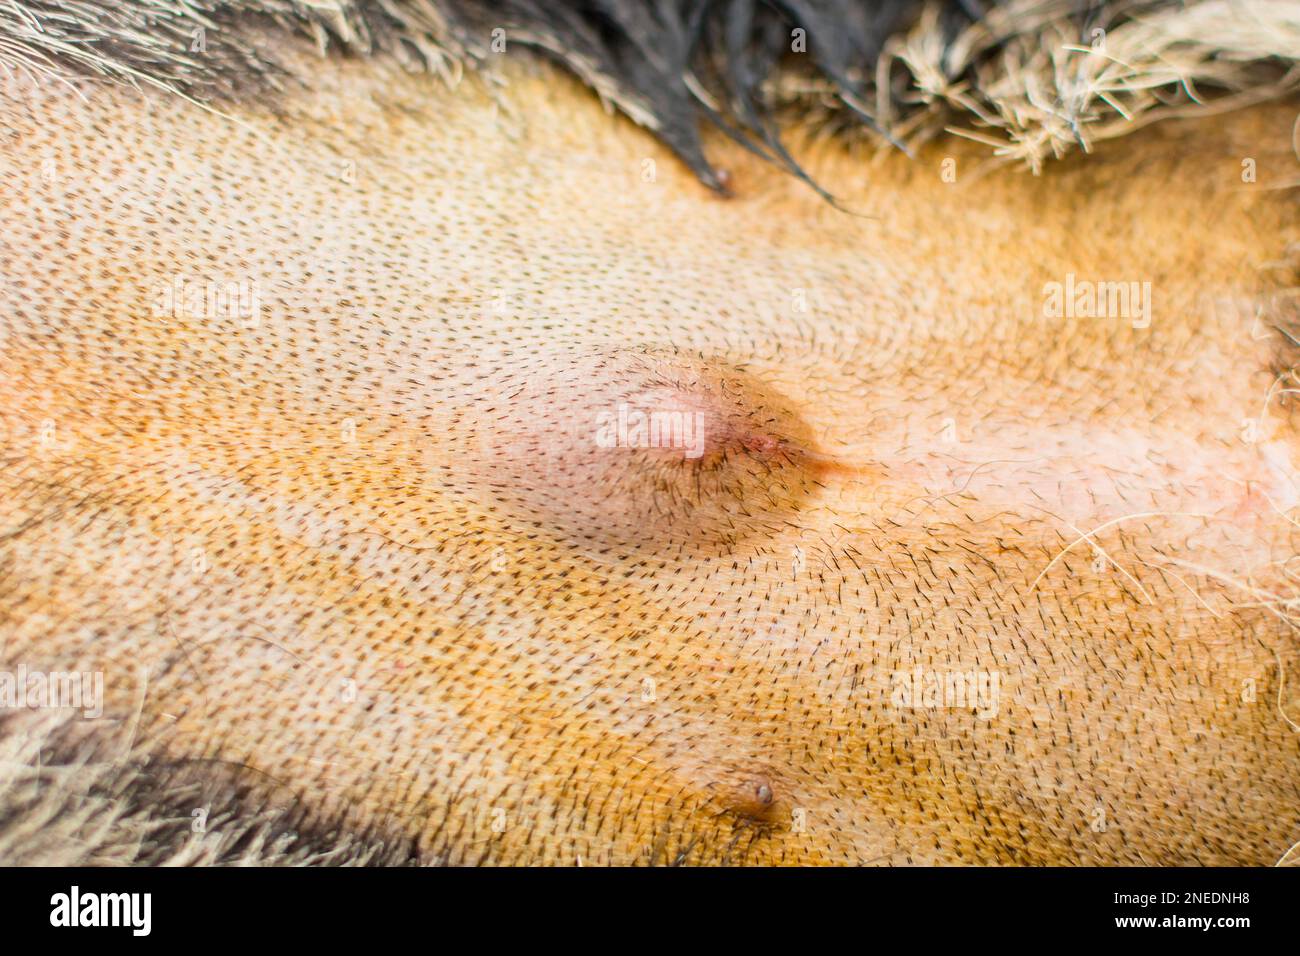 close-up photo of a dog with umbilical hernia Stock Photo